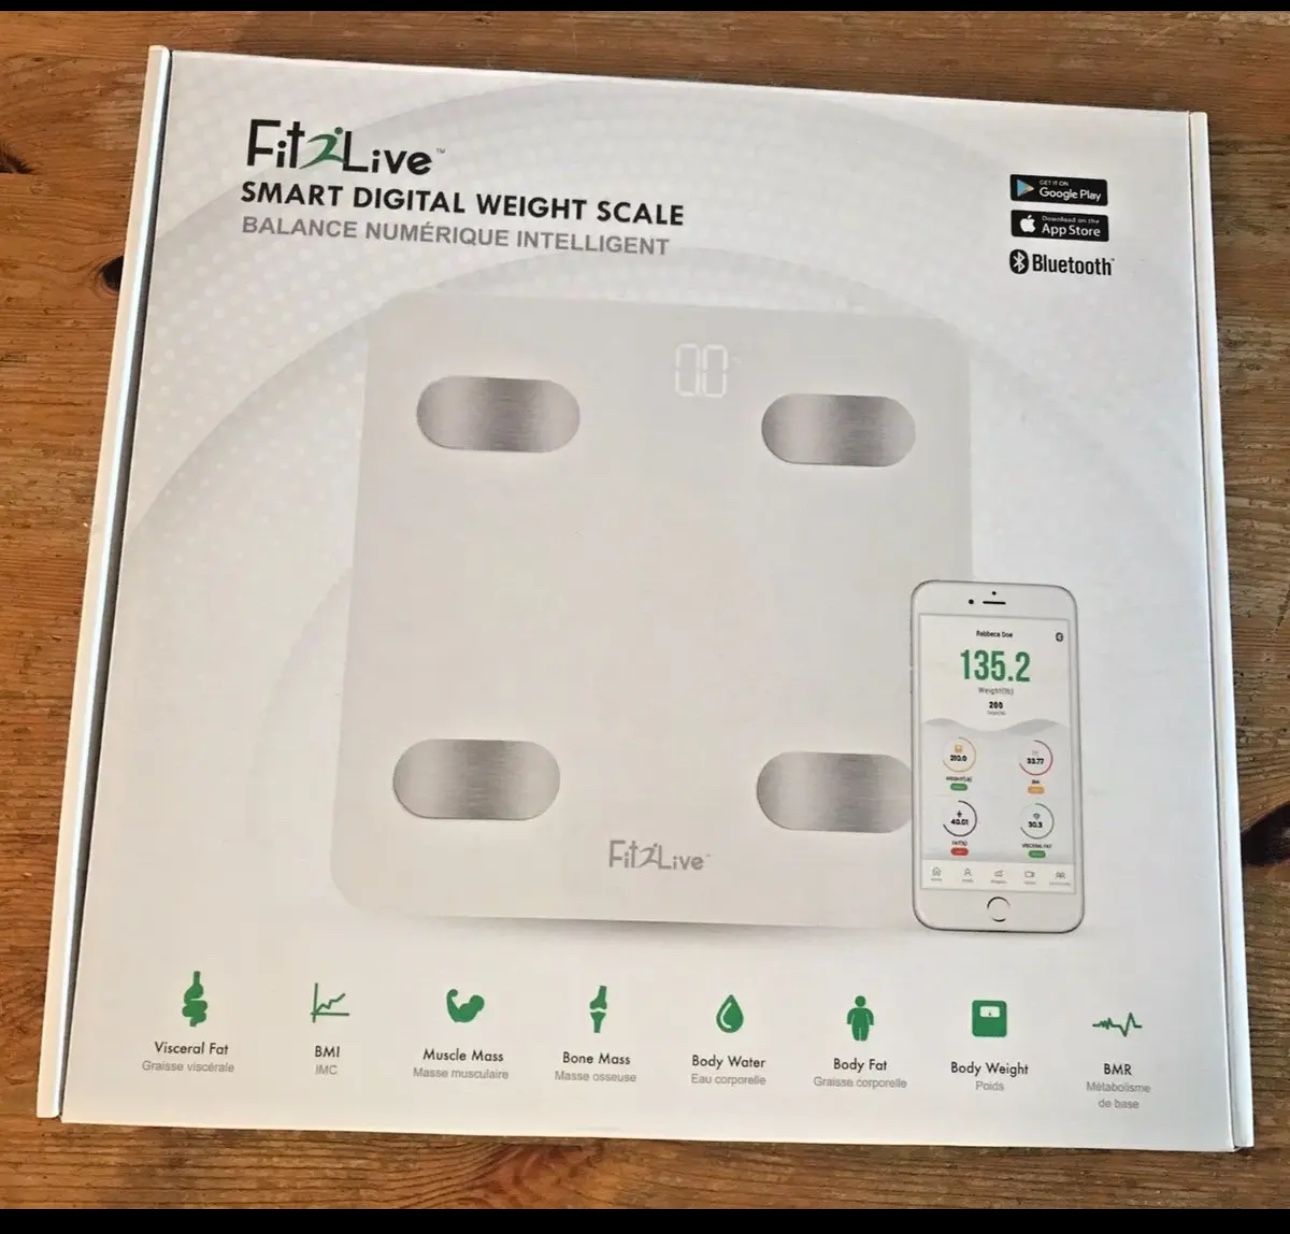 Fit2Live Smart Digital Weight Scale New Bluetooth BMI Muscle Mass Body Fat